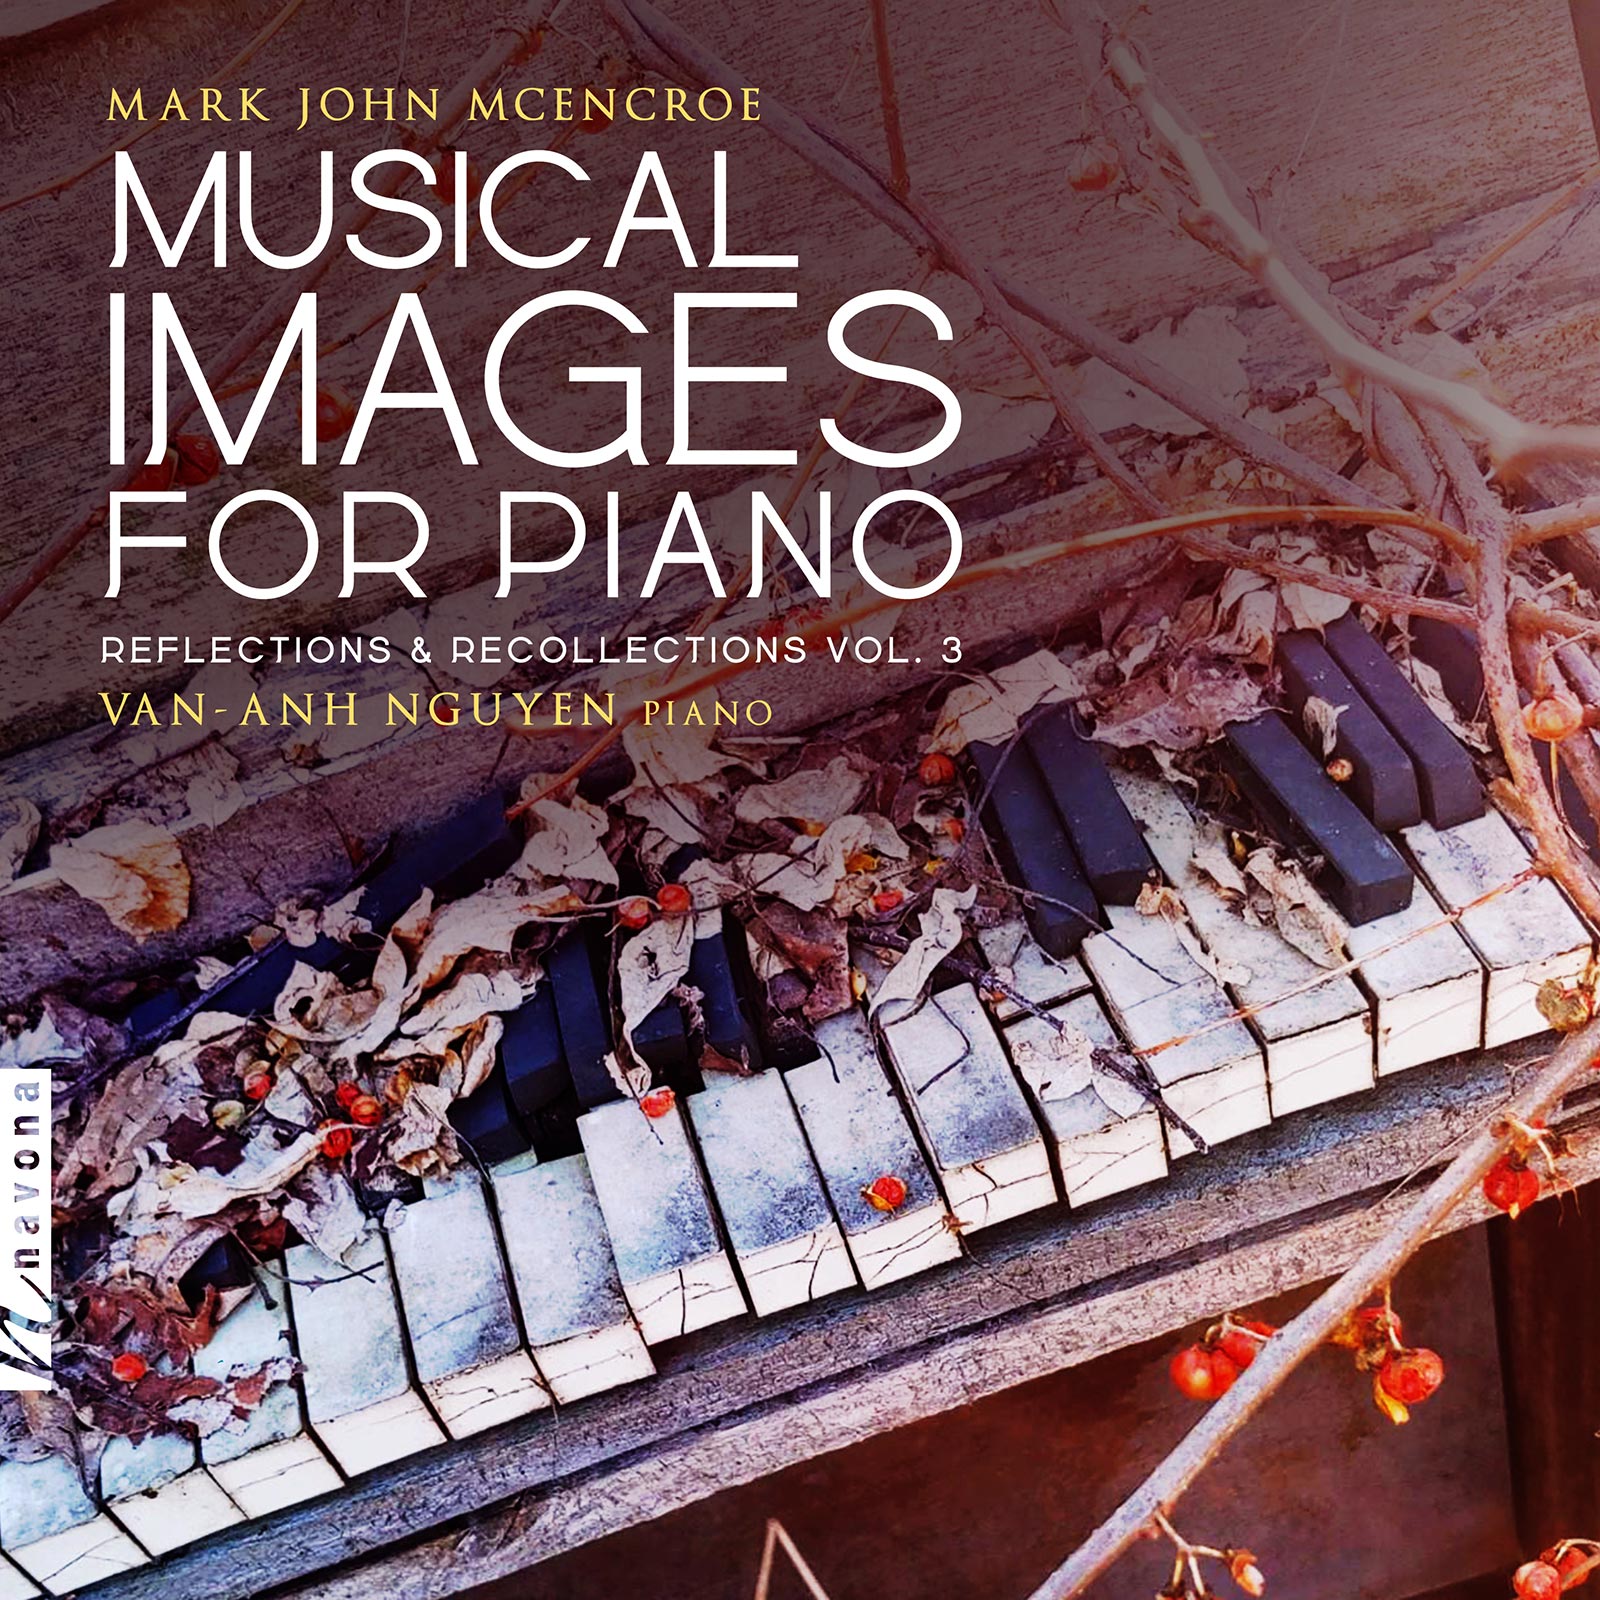 Musical Images for Piano: Reflections & Recollections Vol. 3